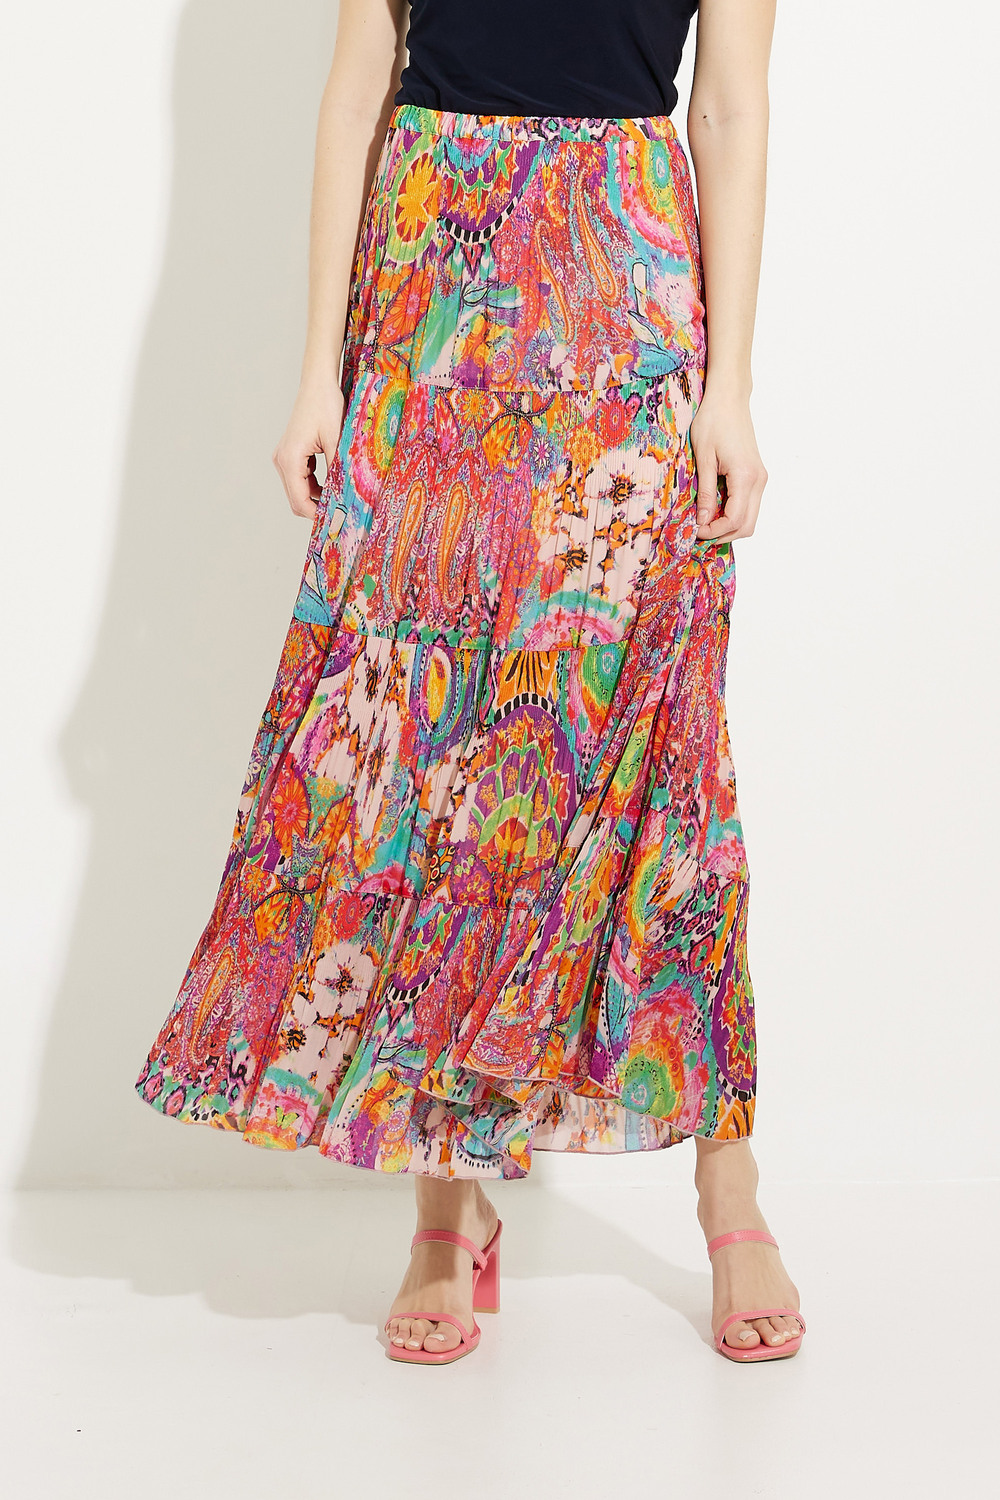 Printed Peasant Skirt Style A41082. As Sample